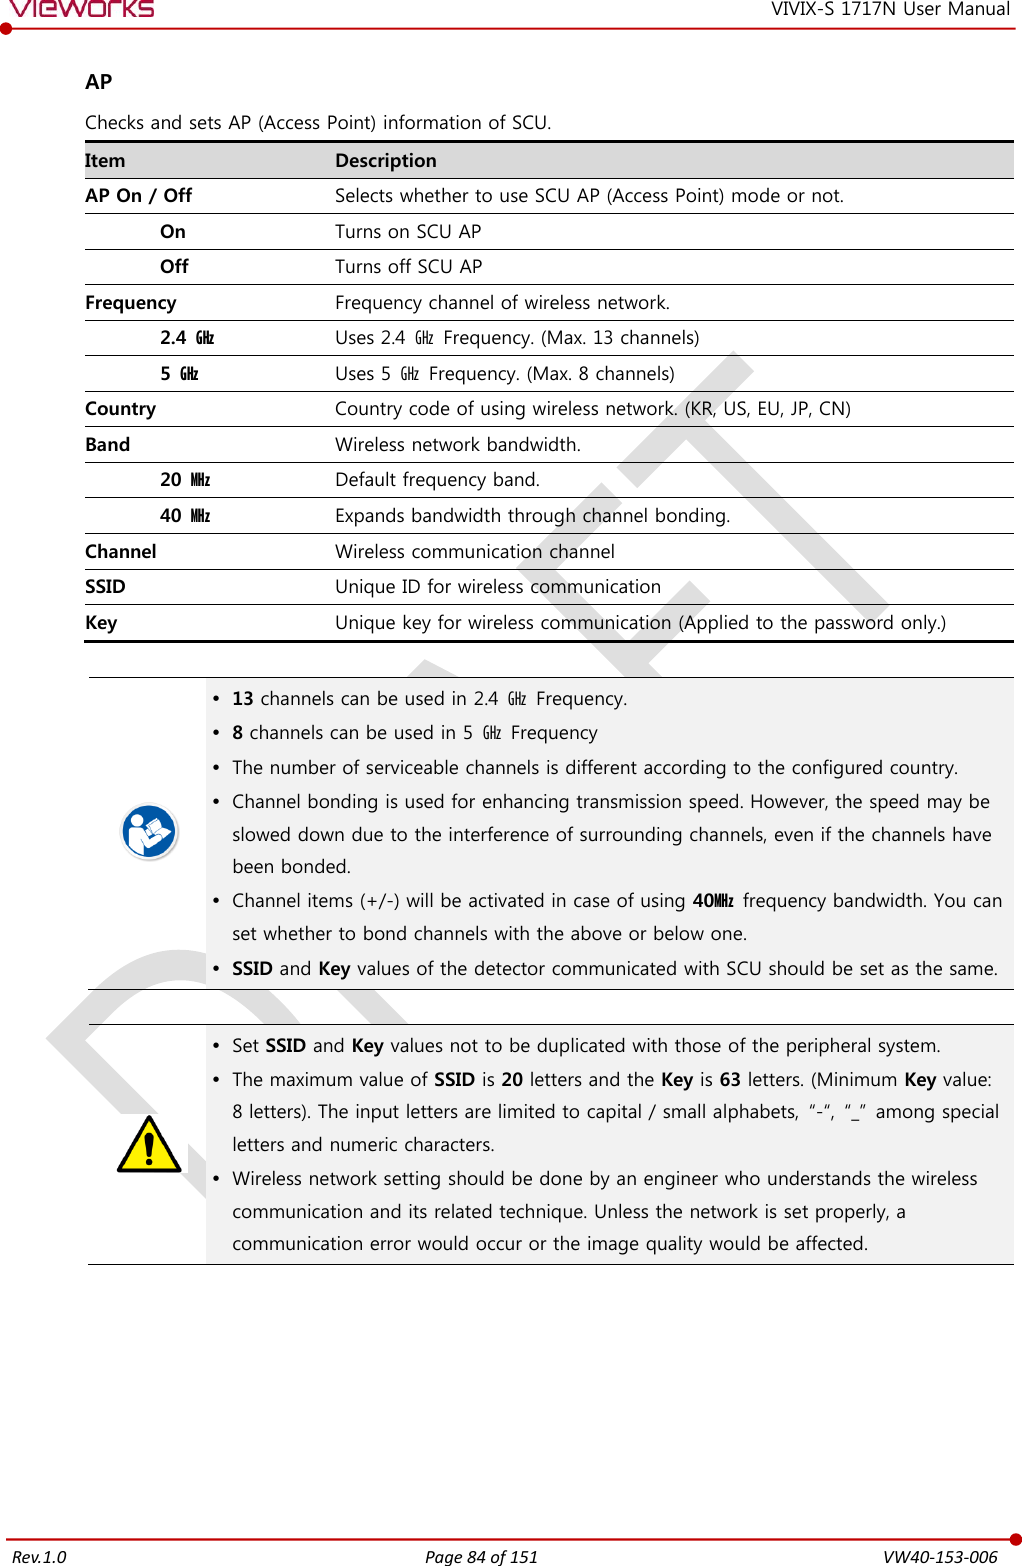   Rev.1.0 Page 84 of 151  VW40-153-006 VIVIX-S 1717N User Manual  AP Checks and sets AP (Access Point) information of SCU. Item Description AP On / Off Selects whether to use SCU AP (Access Point) mode or not. On Turns on SCU AP Off Turns off SCU AP Frequency Frequency channel of wireless network. 2.4  ㎓ Uses 2.4 ㎓  Frequency. (Max. 13 channels) 5  ㎓ Uses 5 ㎓ Frequency. (Max. 8 channels) Country Country code of using wireless network. (KR, US, EU, JP, CN) Band Wireless network bandwidth. 20 ㎒ Default frequency band. 40 ㎒ Expands bandwidth through channel bonding. Channel Wireless communication channel SSID Unique ID for wireless communication Key Unique key for wireless communication (Applied to the password only.)    13 channels can be used in 2.4 ㎓ Frequency.  8 channels can be used in 5  ㎓  Frequency  The number of serviceable channels is different according to the configured country.  Channel bonding is used for enhancing transmission speed. However, the speed may be slowed down due to the interference of surrounding channels, even if the channels have been bonded.  Channel items (+/-) will be activated in case of using 40㎒ frequency bandwidth. You can set whether to bond channels with the above or below one.  SSID and Key values of the detector communicated with SCU should be set as the same.    Set SSID and Key values not to be duplicated with those of the peripheral system.  The maximum value of SSID is 20 letters and the Key is 63 letters. (Minimum Key value: 8 letters). The input letters are limited to capital / small alphabets,  “-“,  “_”  among special letters and numeric characters.  Wireless network setting should be done by an engineer who understands the wireless communication and its related technique. Unless the network is set properly, a communication error would occur or the image quality would be affected.        